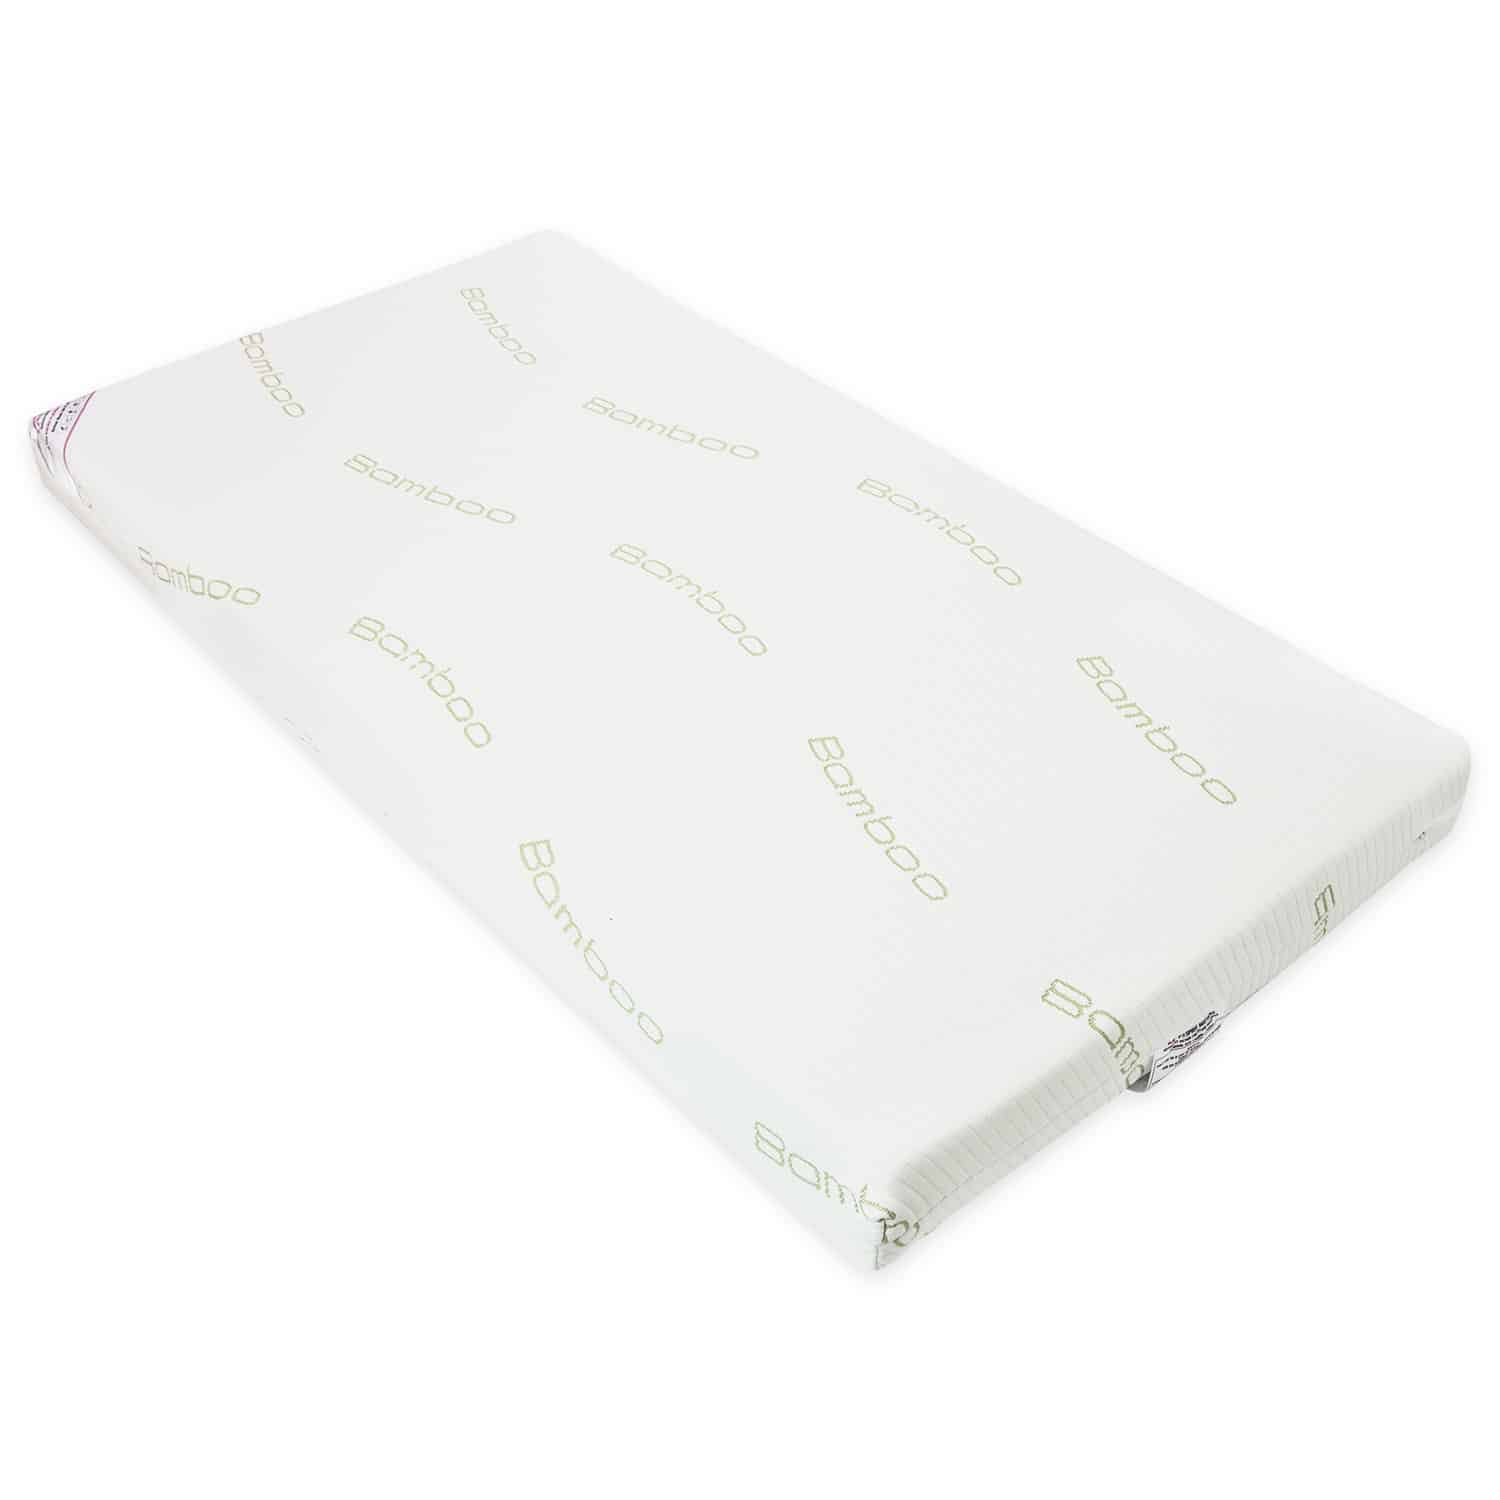 KATY® Quilted Bamboo Covered Anti-Allergy Sprung Cot Bed/Junior Bed Spring Mattress 140 x 70 x 10cm Thick